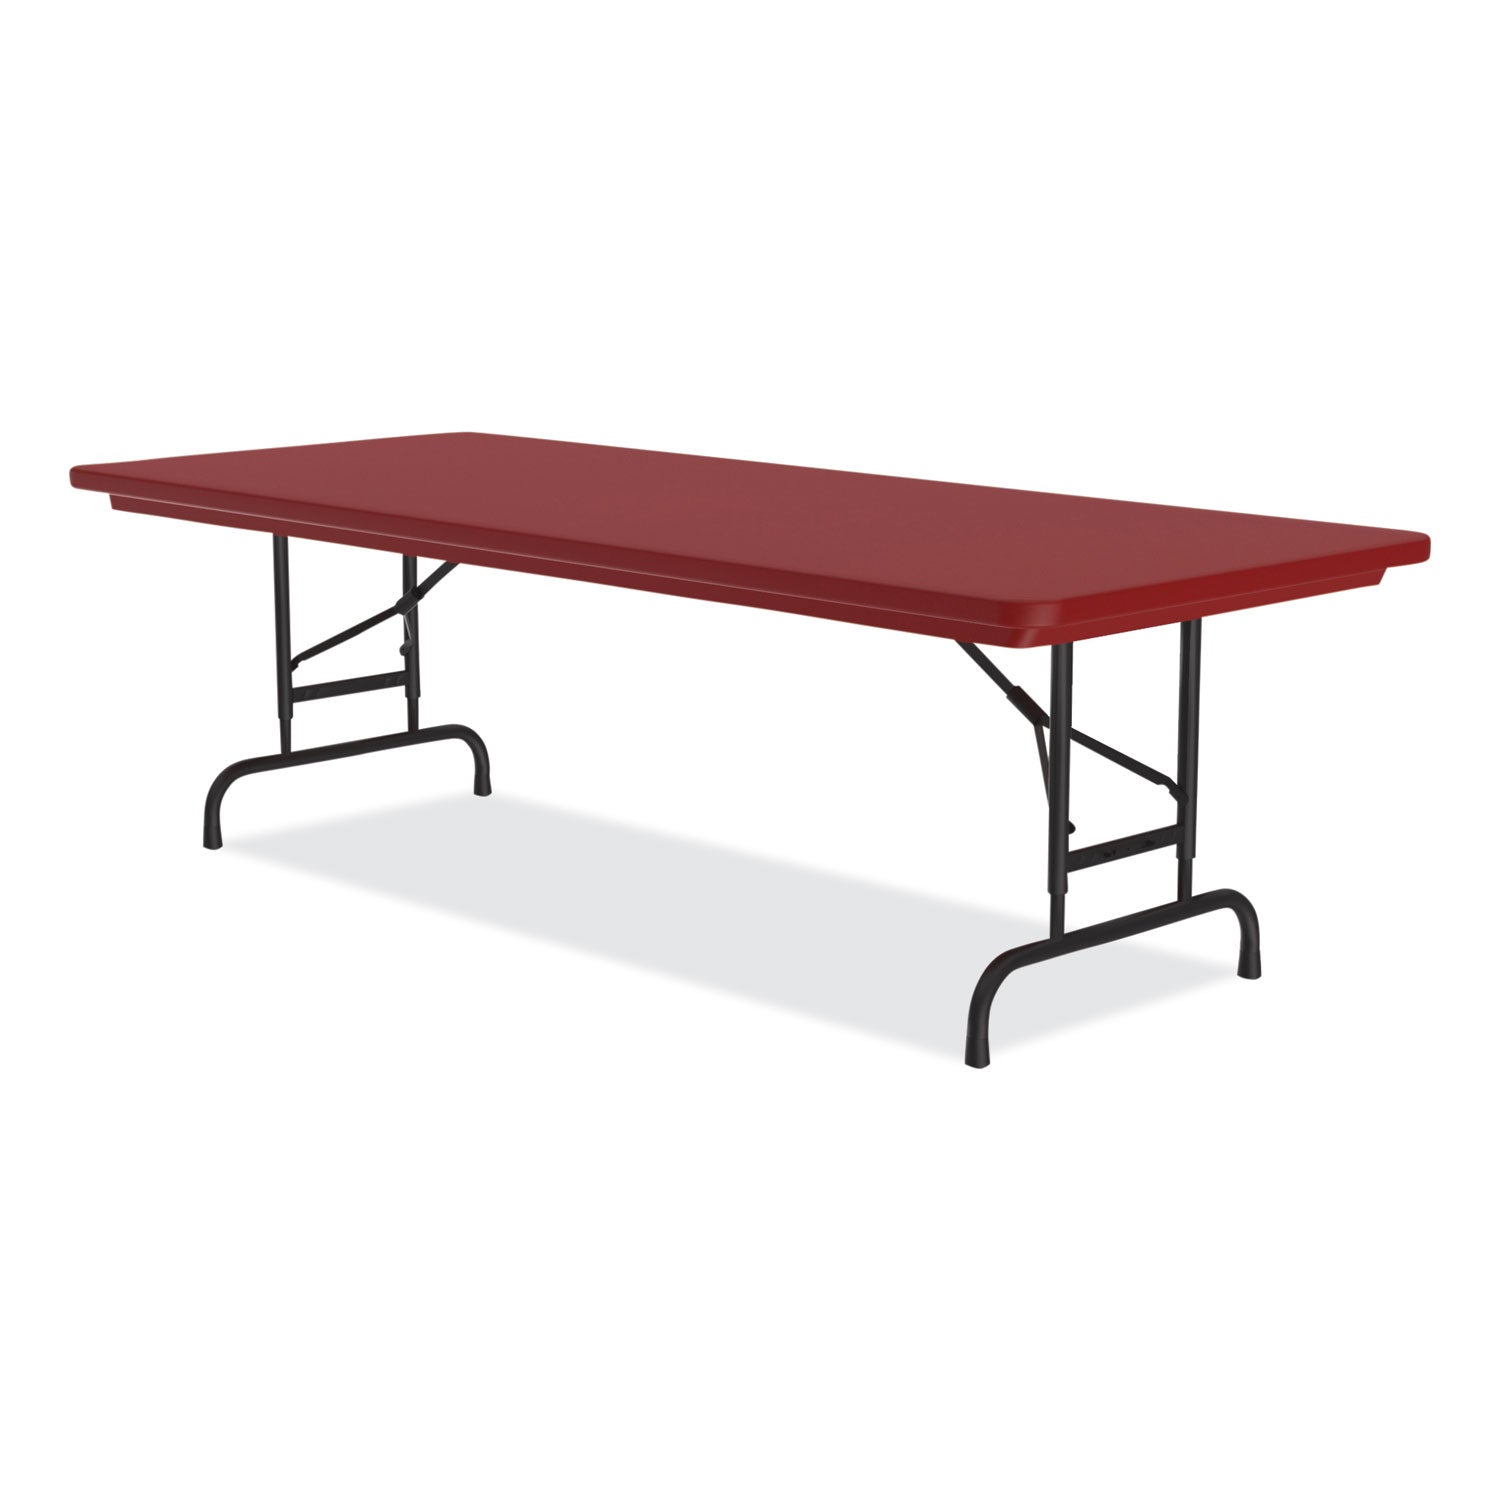 adjustable-folding-tables-rectangular-72-x-30-x-22-to-32-red-top-black-base-4-pallet-ships-in-4-6-business-days_crlra3072254p - 3